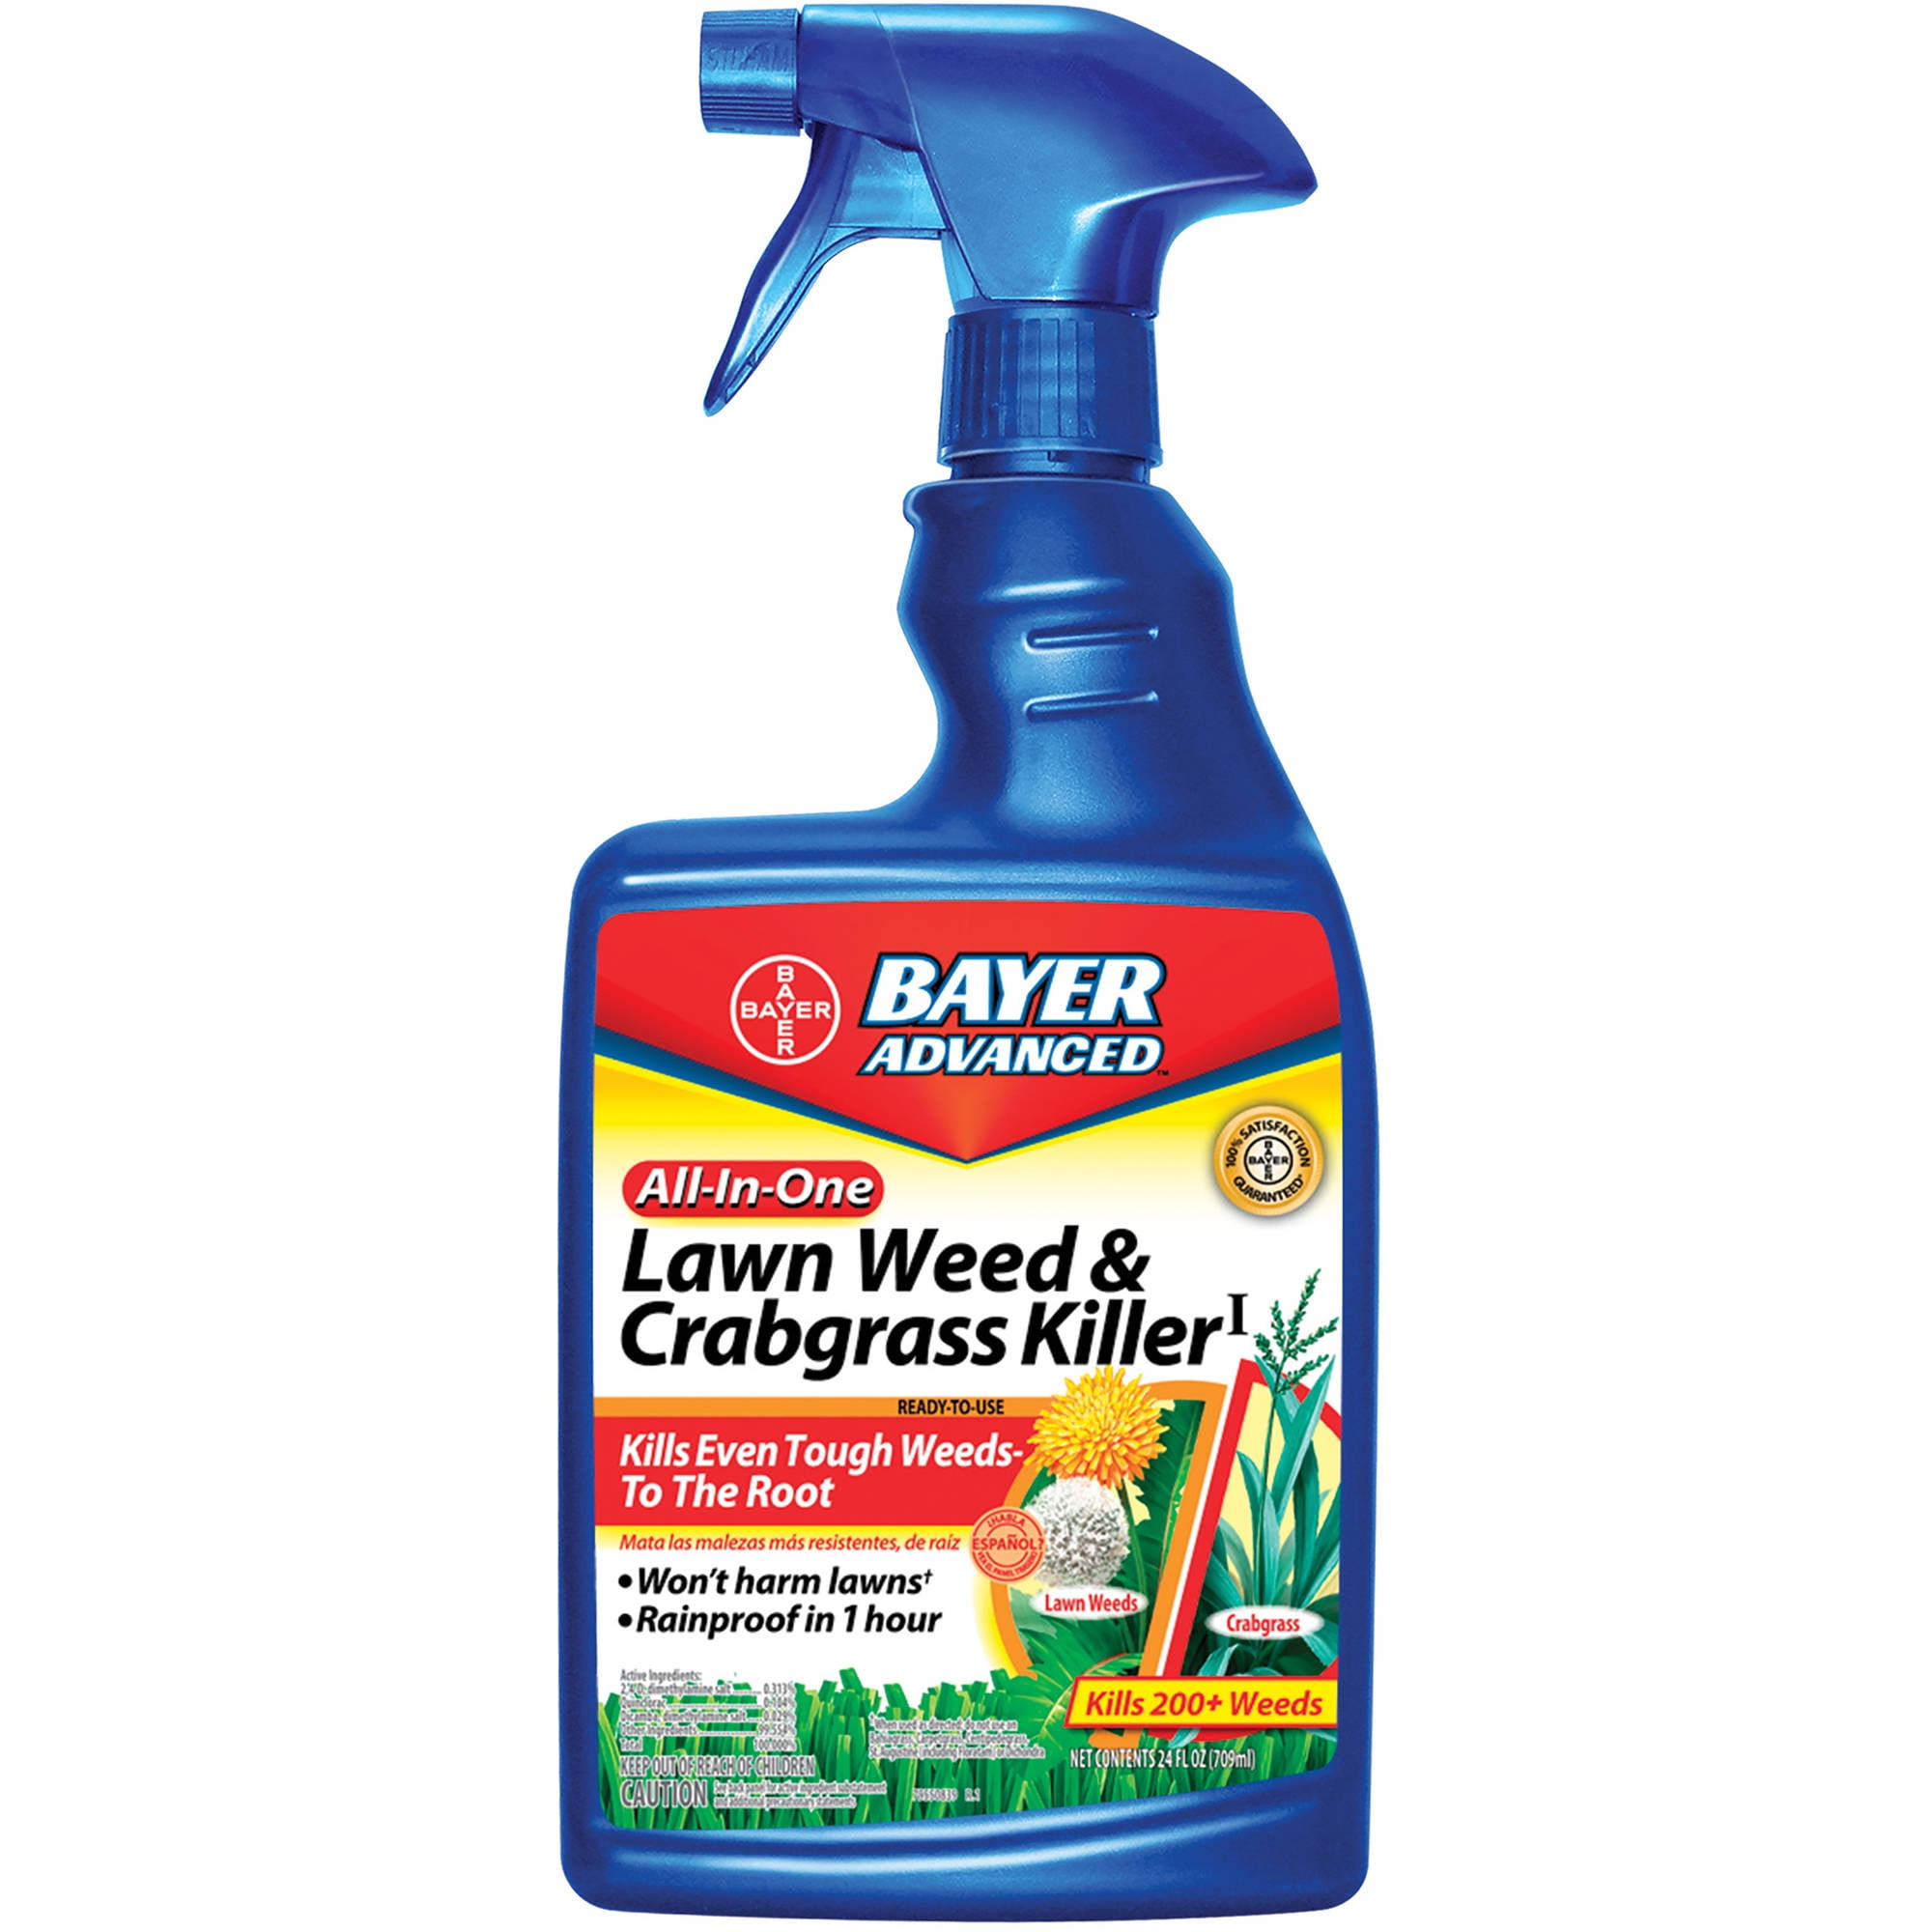 bayer-advanced-a-all-in-one-lawn-weed-and-crabgrass-killer-oz-my-xxx